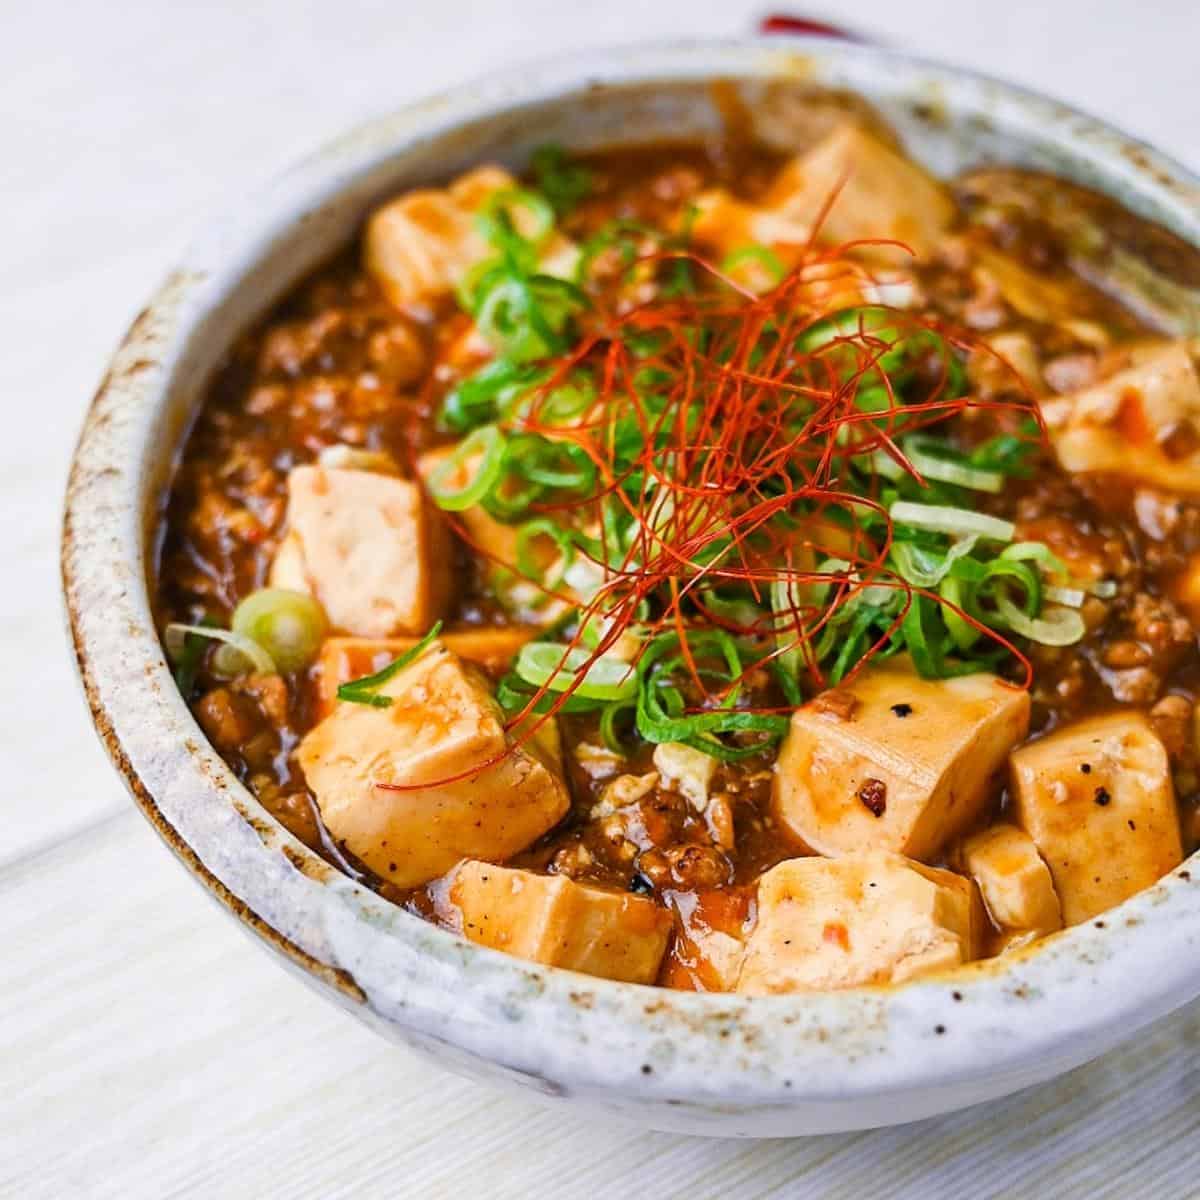 Japanese style mapo tofu topped with spring onion and chili threads